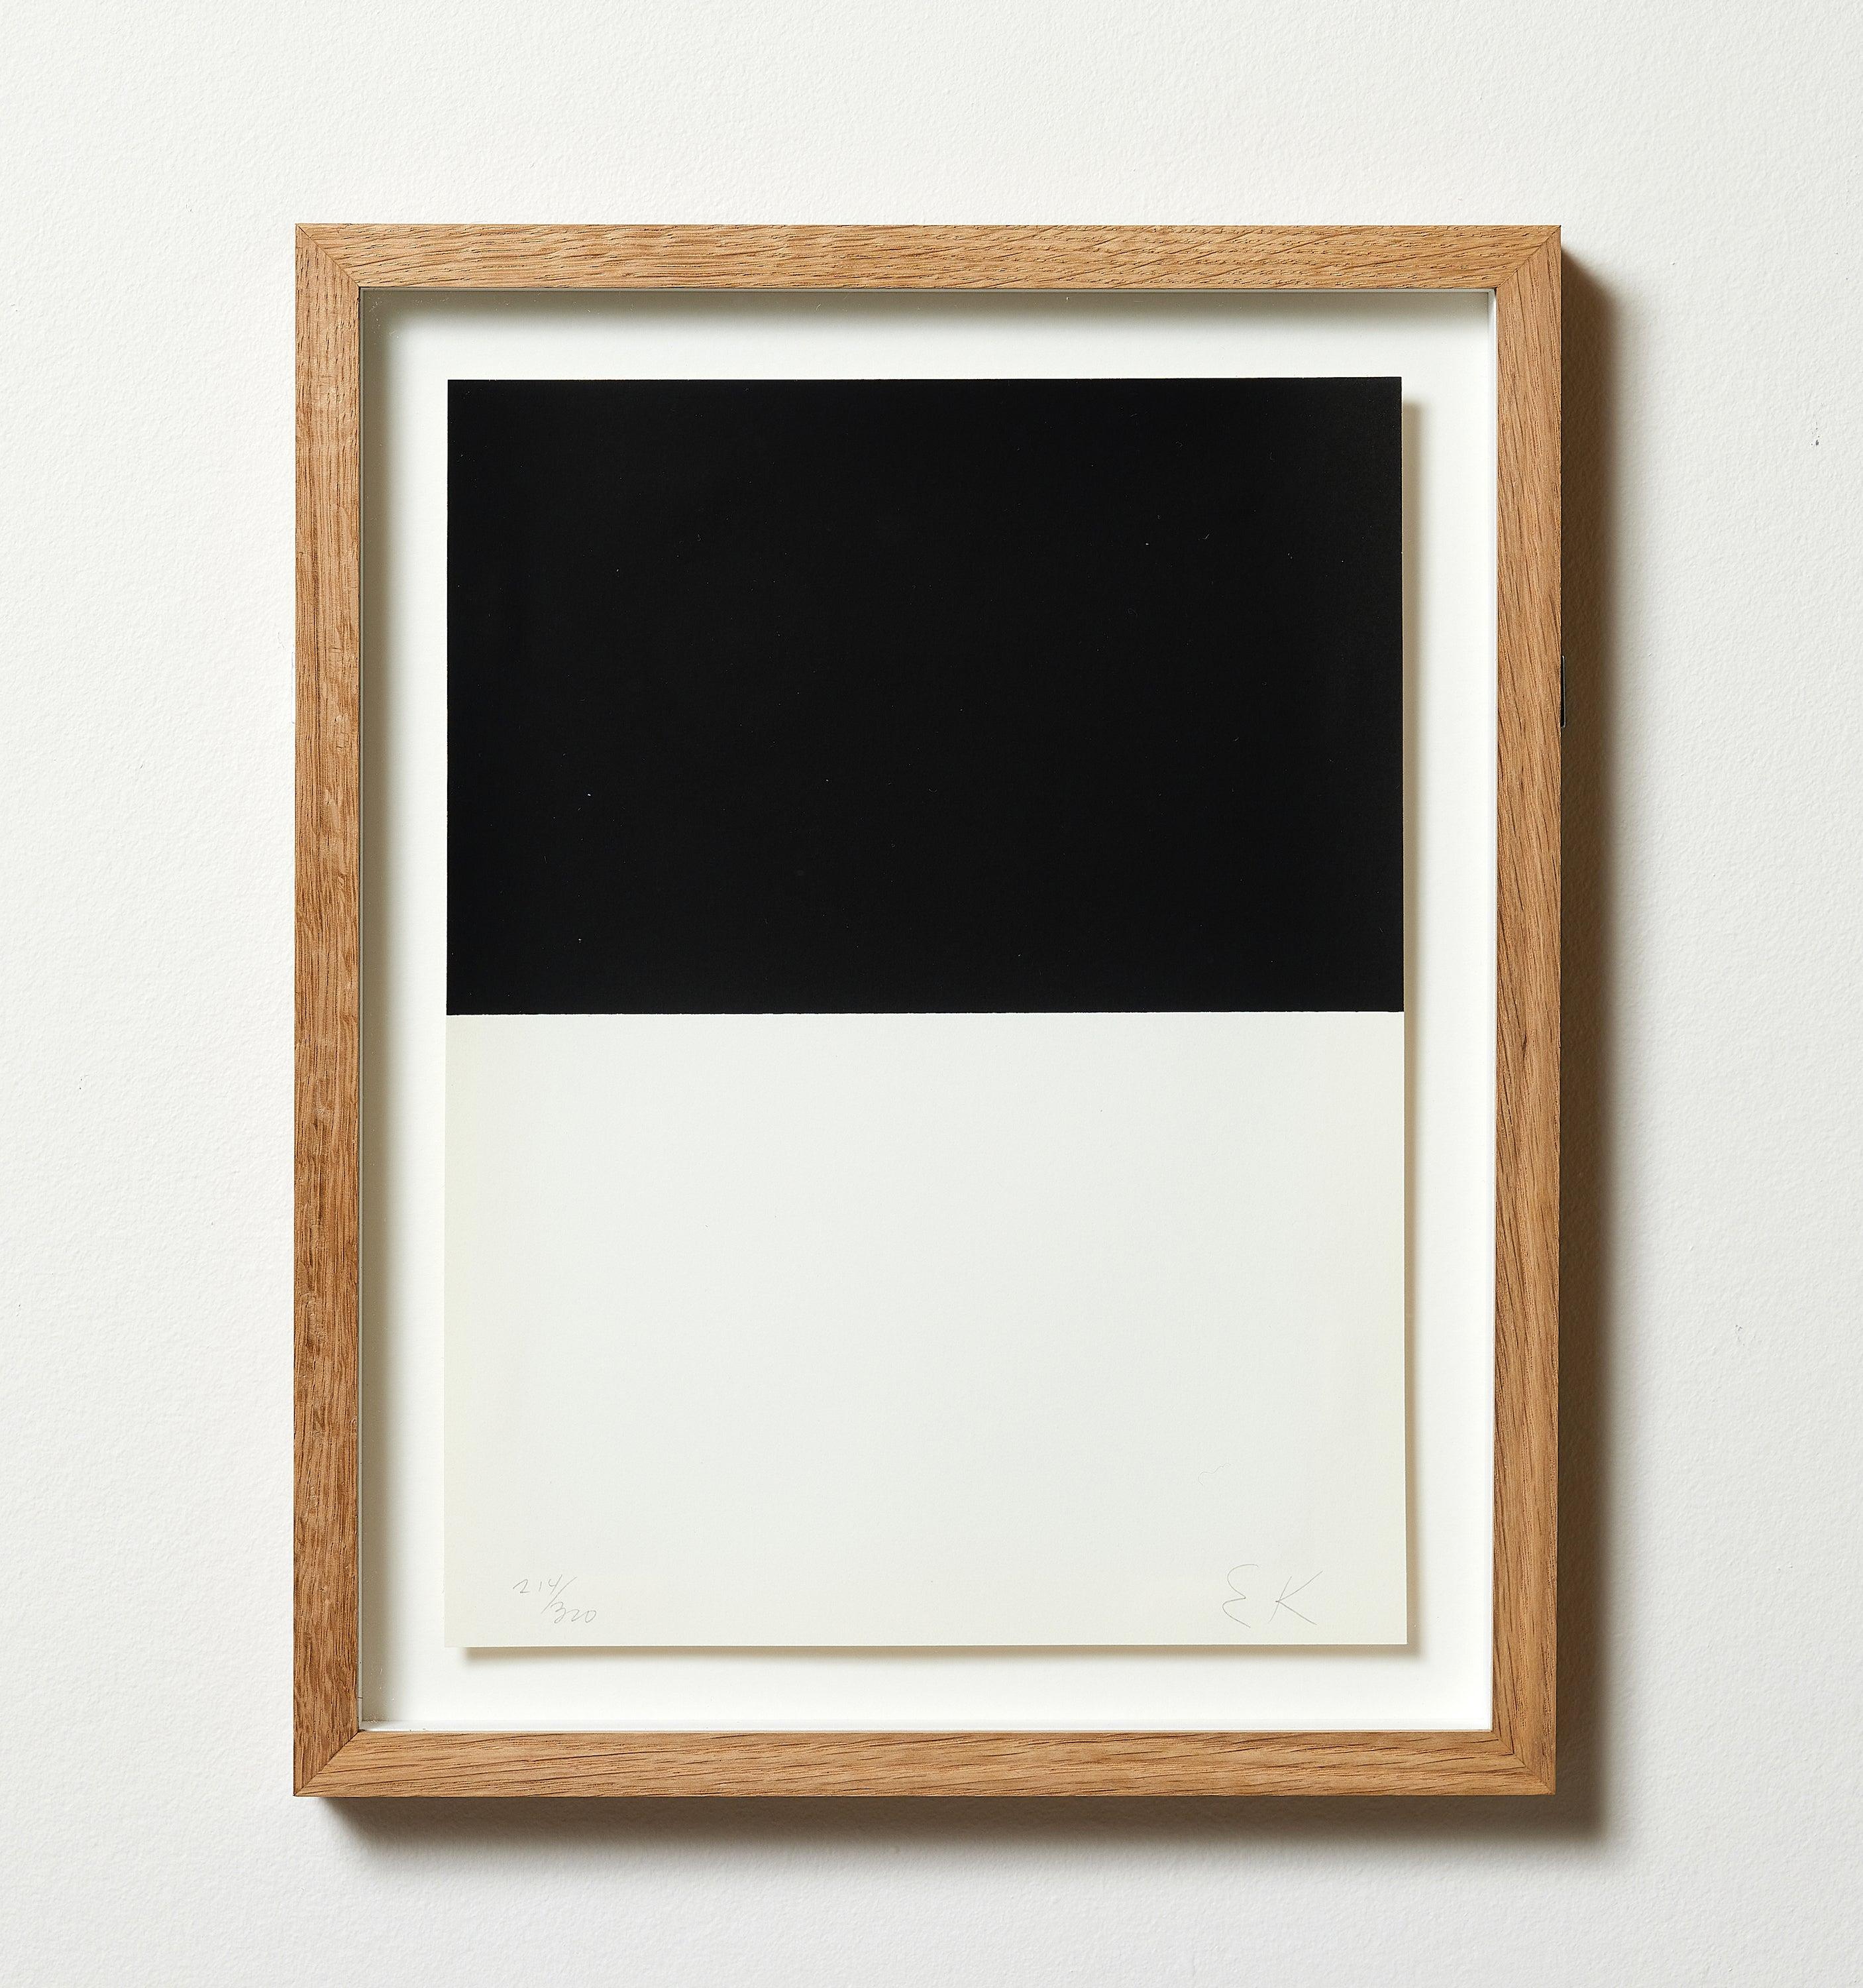 ELLSWORTH KELLY
Untitled, 1973
Screenprint, on BFK Rives paper
Signed and numbered from the edition of 300 
With the artist's copyright inkstamp verso
From The New York Collection for Stockholm
Printed by Styria Studio Inc., New York
Published by